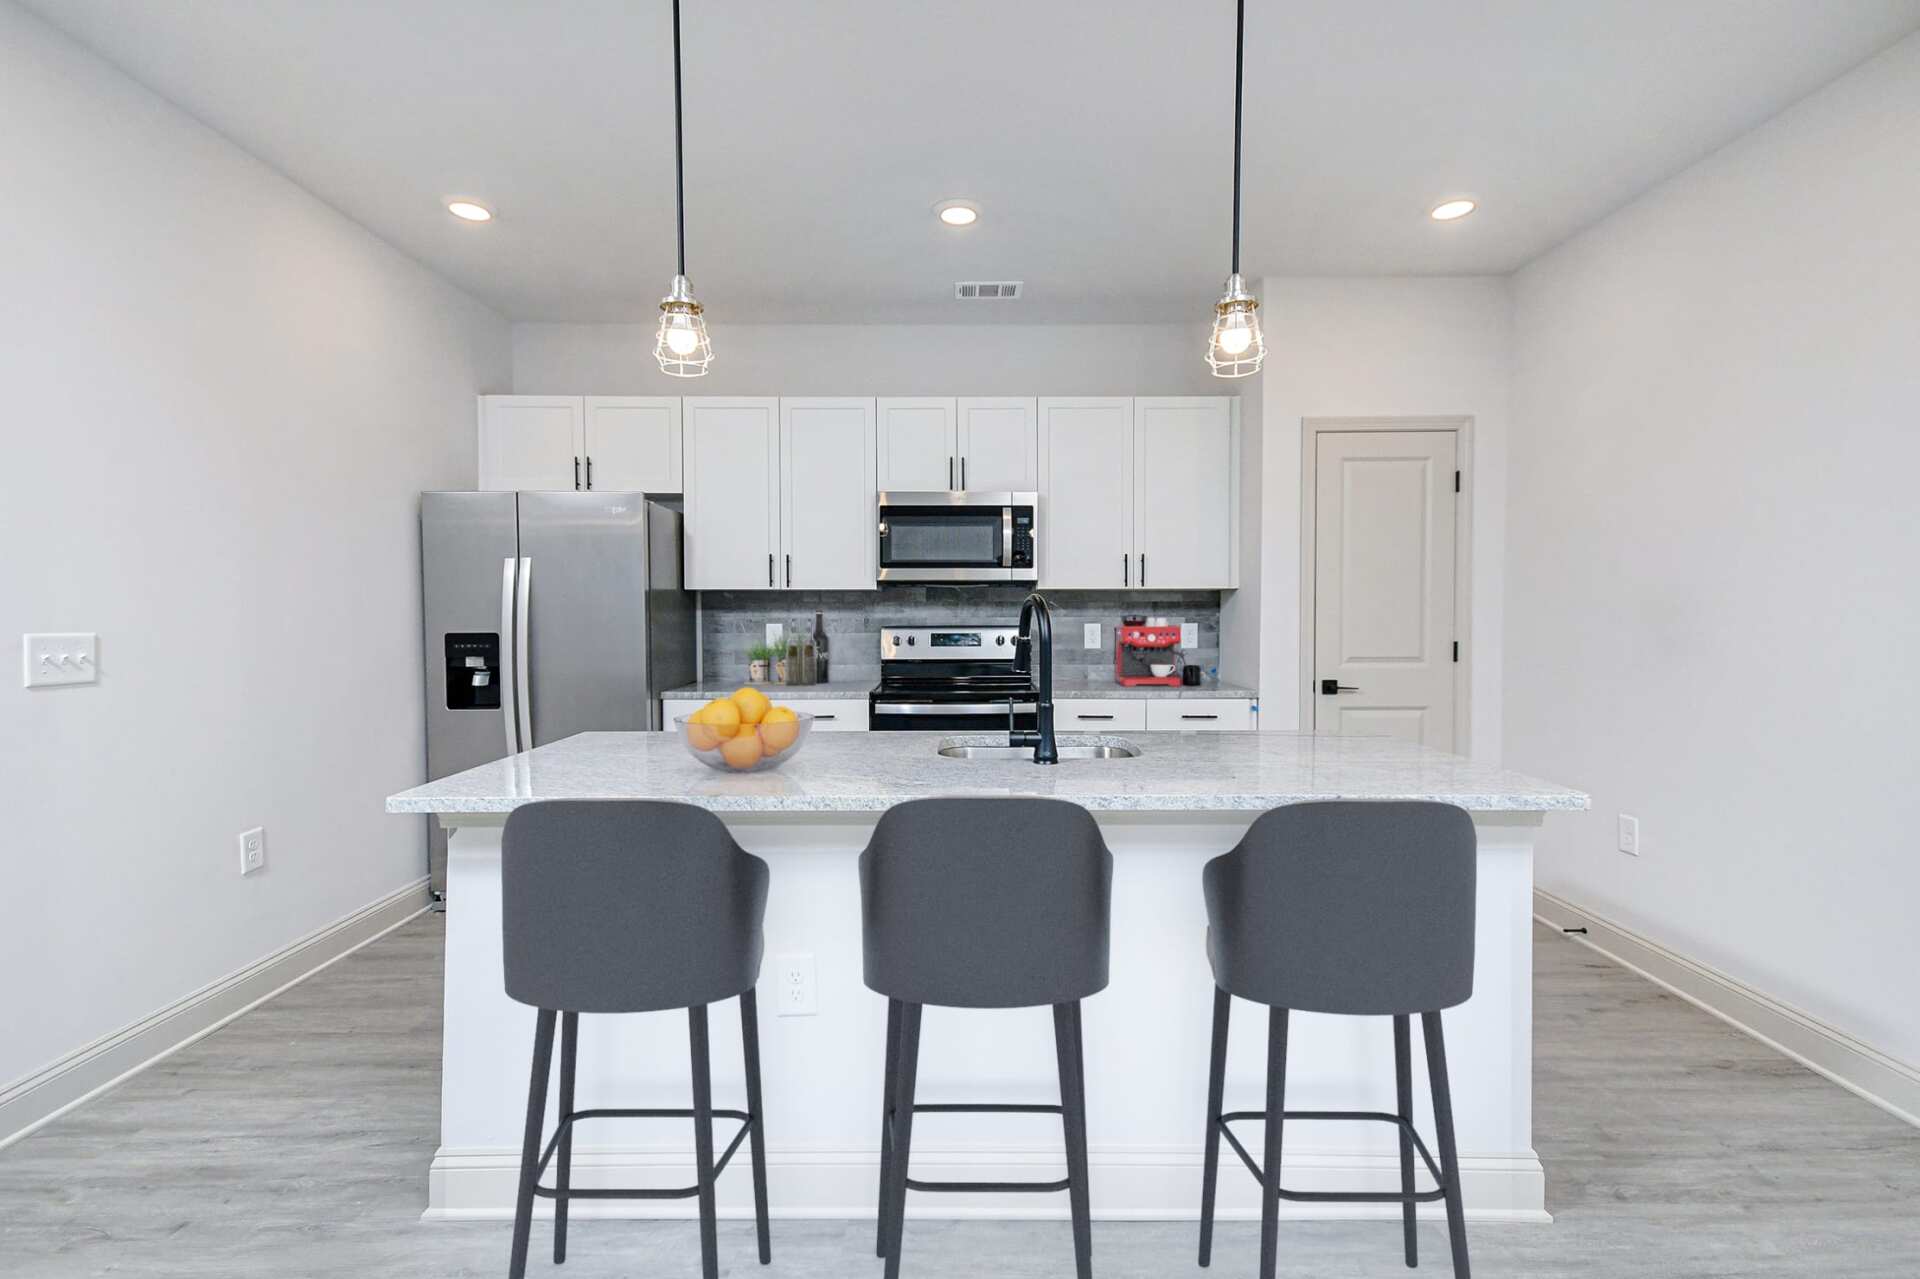 The Blakely kitchen with spacious island.